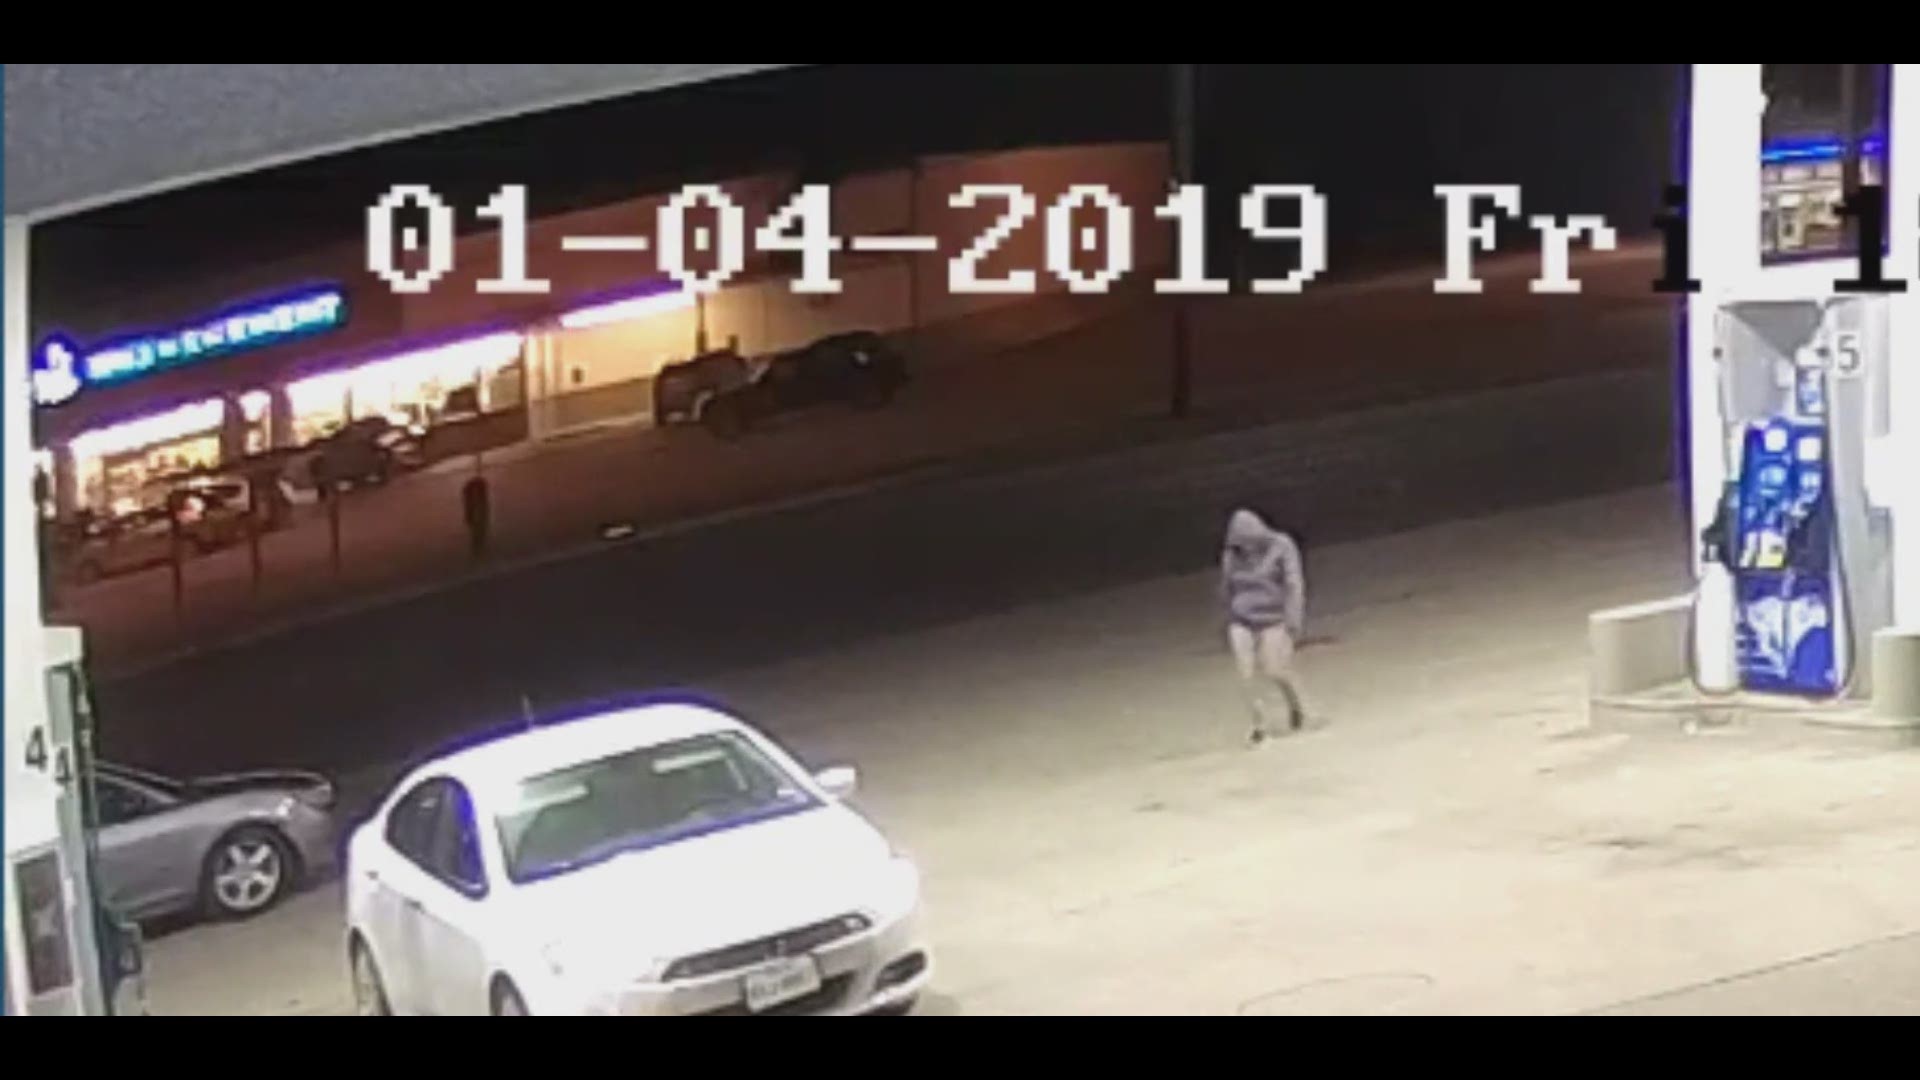 SAPD-provided video of suspect in king jay davila search